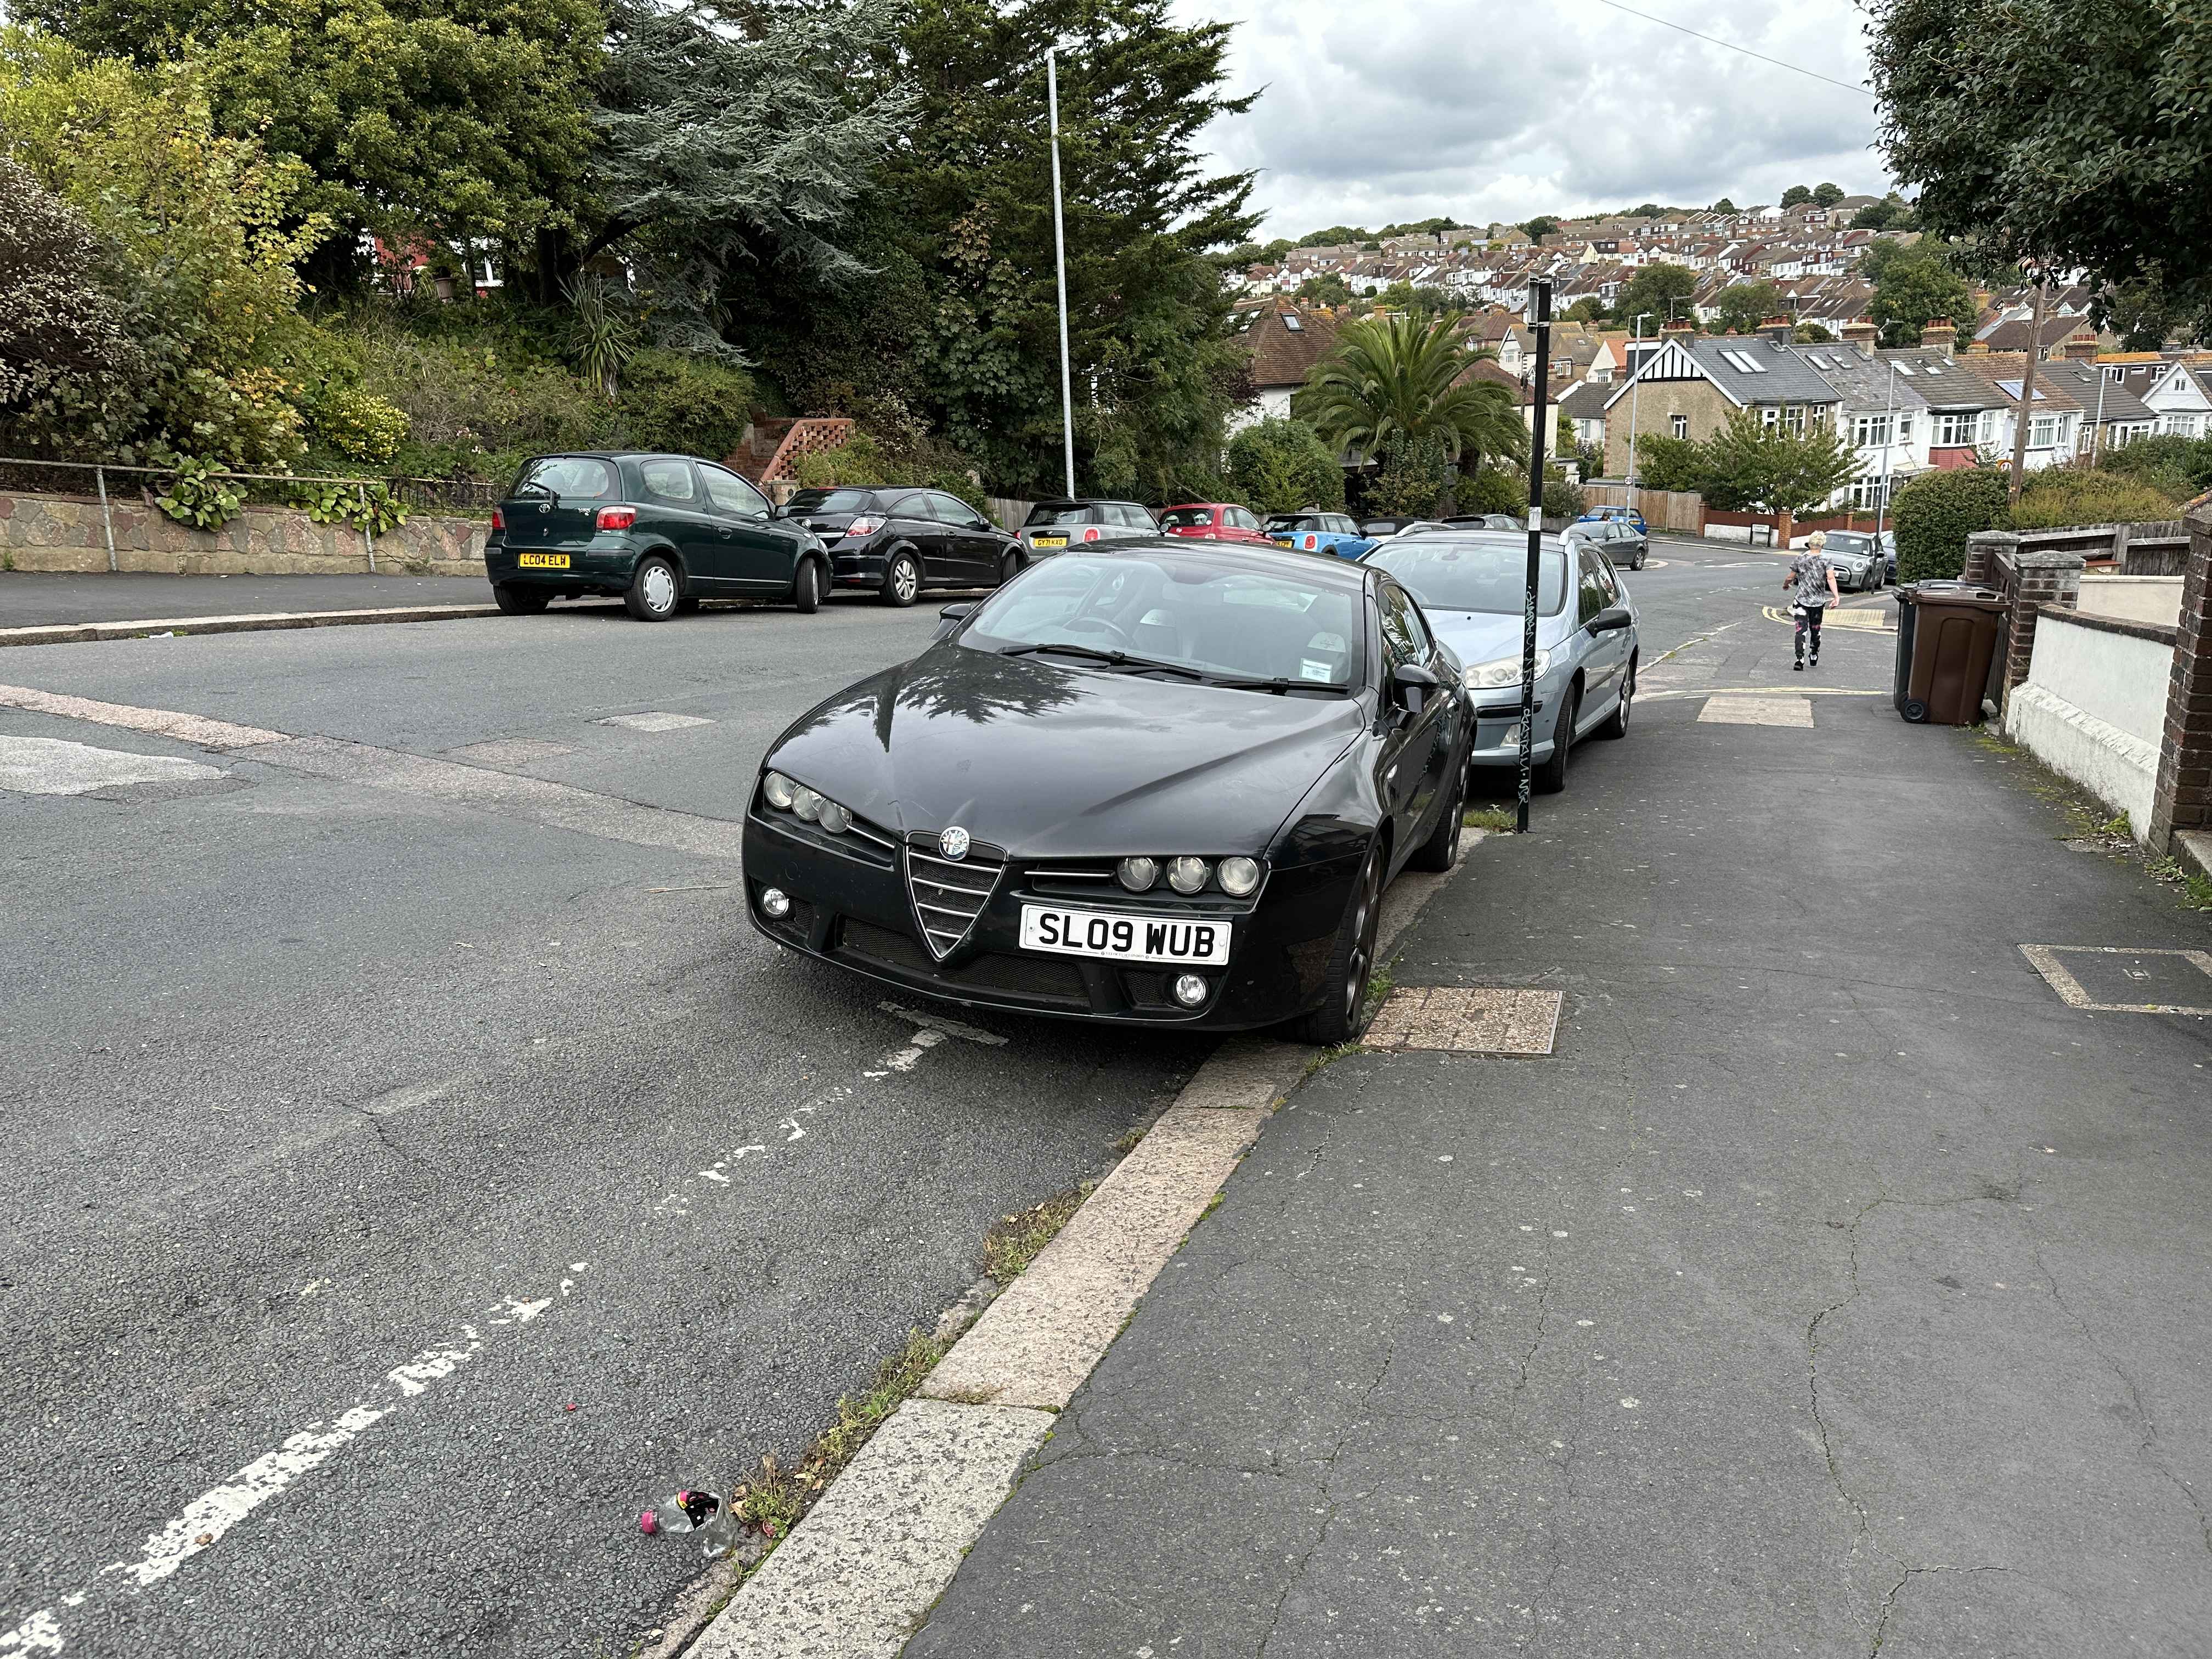 Photograph of SL09 WUB - a Black Alfa Romeo Brera parked in Hollingdean by a non-resident. The sixth of twenty photographs supplied by the residents of Hollingdean.